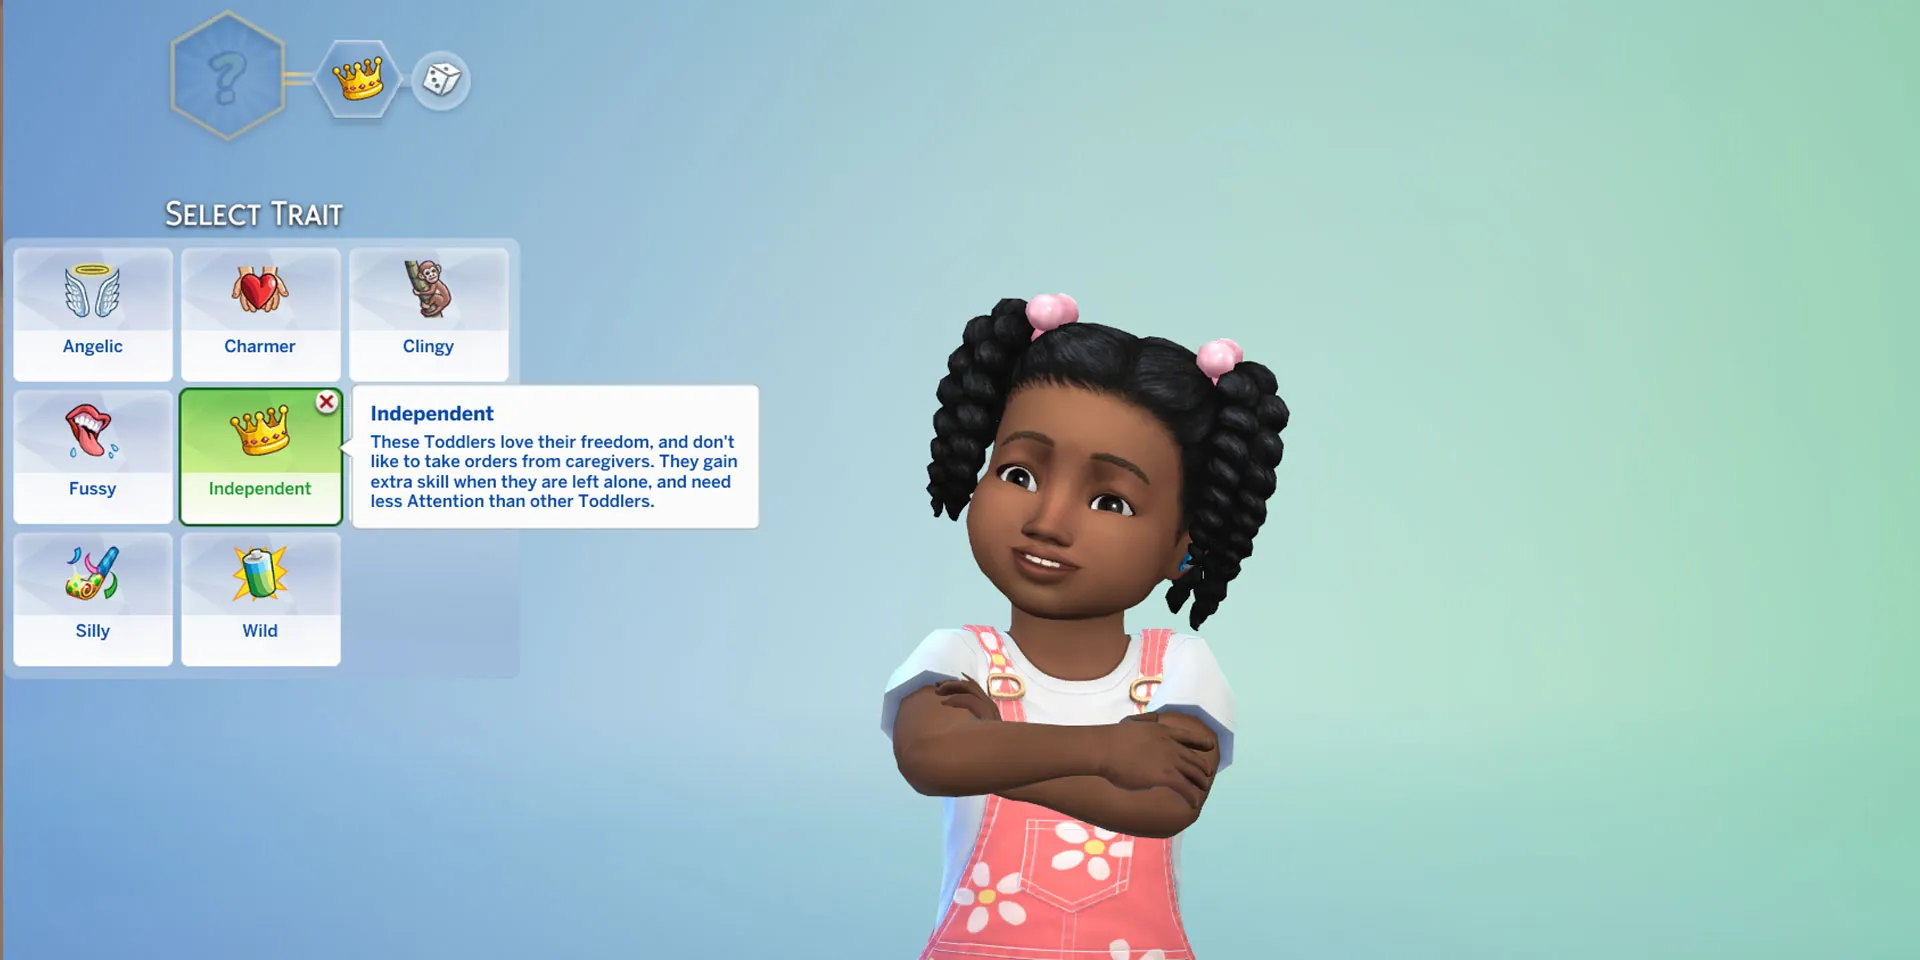 The Sims 4のIndependent特性がCreate-A-Simで選択された幼児の画像。